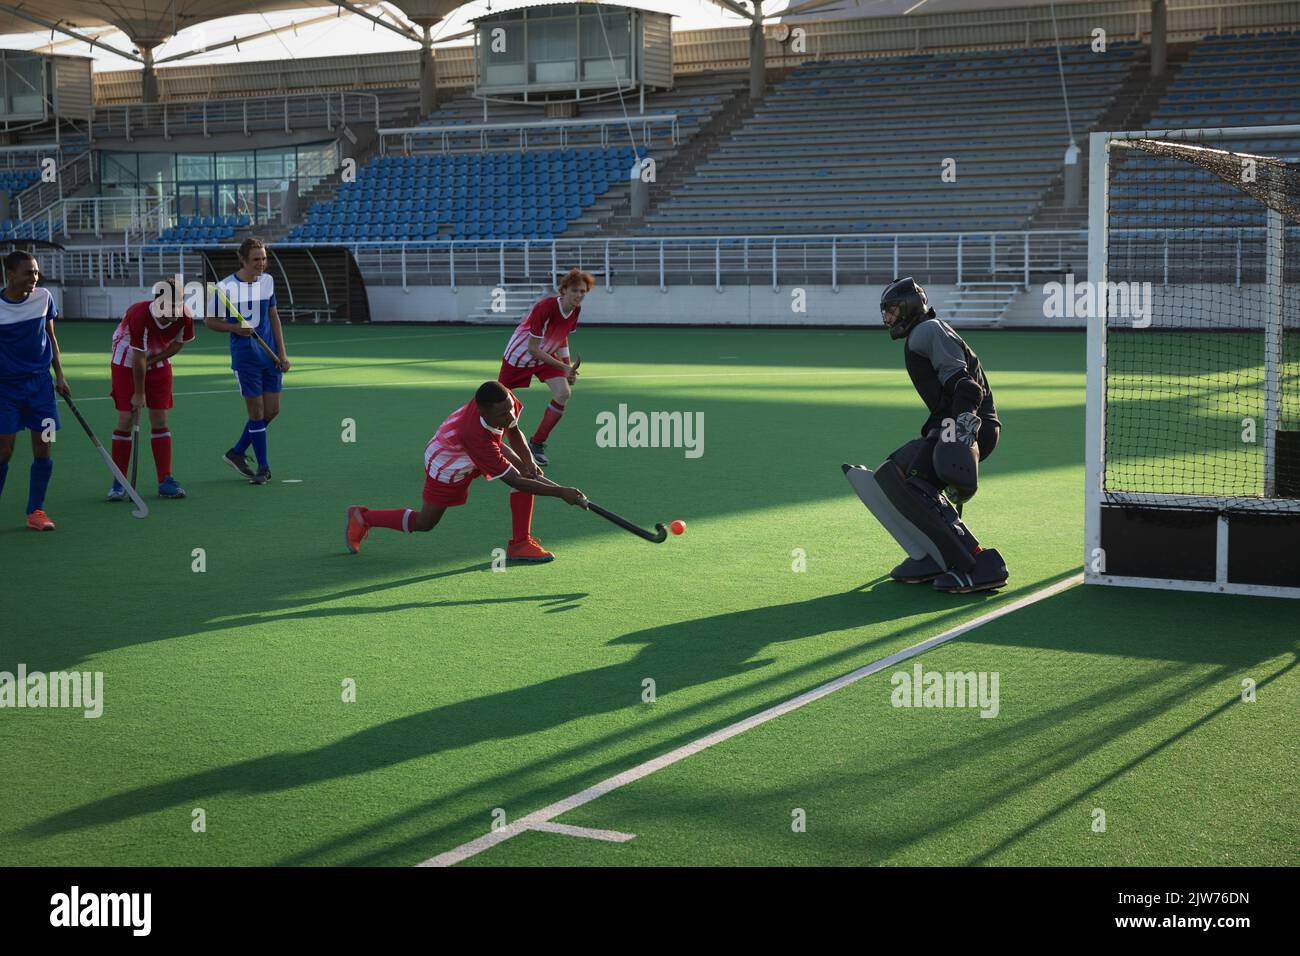 Field hockey player taking a shot a goal during a match Stock Photo